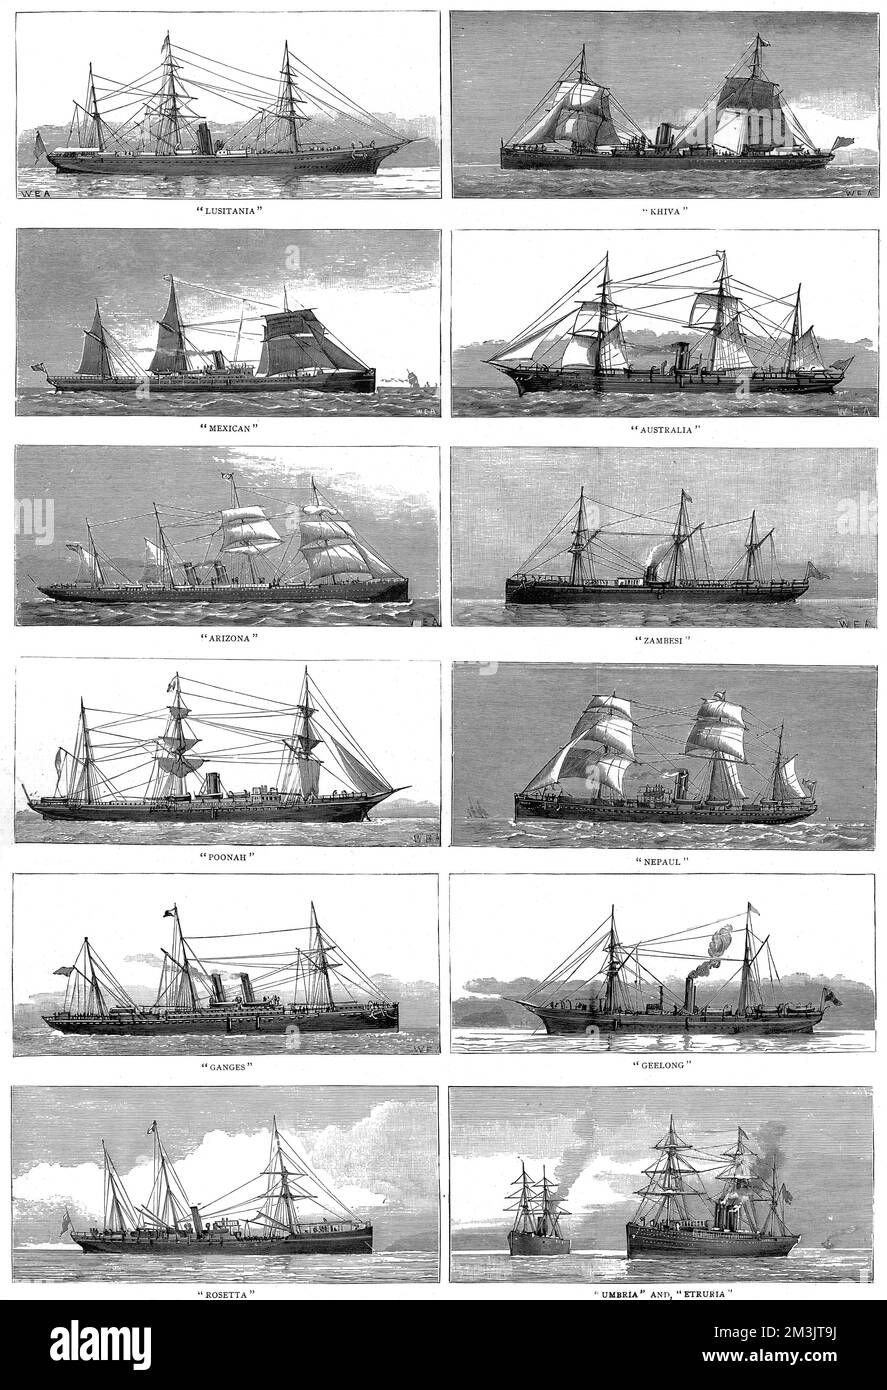 Steamships 'Lusitania', 'Khiva', 'Mexican', 'Australia', 'Arizona', 'Zambesi', 'Poonah', 'Nepaul', 'Ganges', 'Geelong', 'Rosetta', 'Umbria' and 'Etruria' (left to right, top to bottom). These ships, from the P&amp;O, Cunard, Orient, Union and Guion Lines, were among 150 merchant vessels that the British Government could have taken over to act as Armed Cruisers in the event of a war with Russia.  1885 Stock Photo